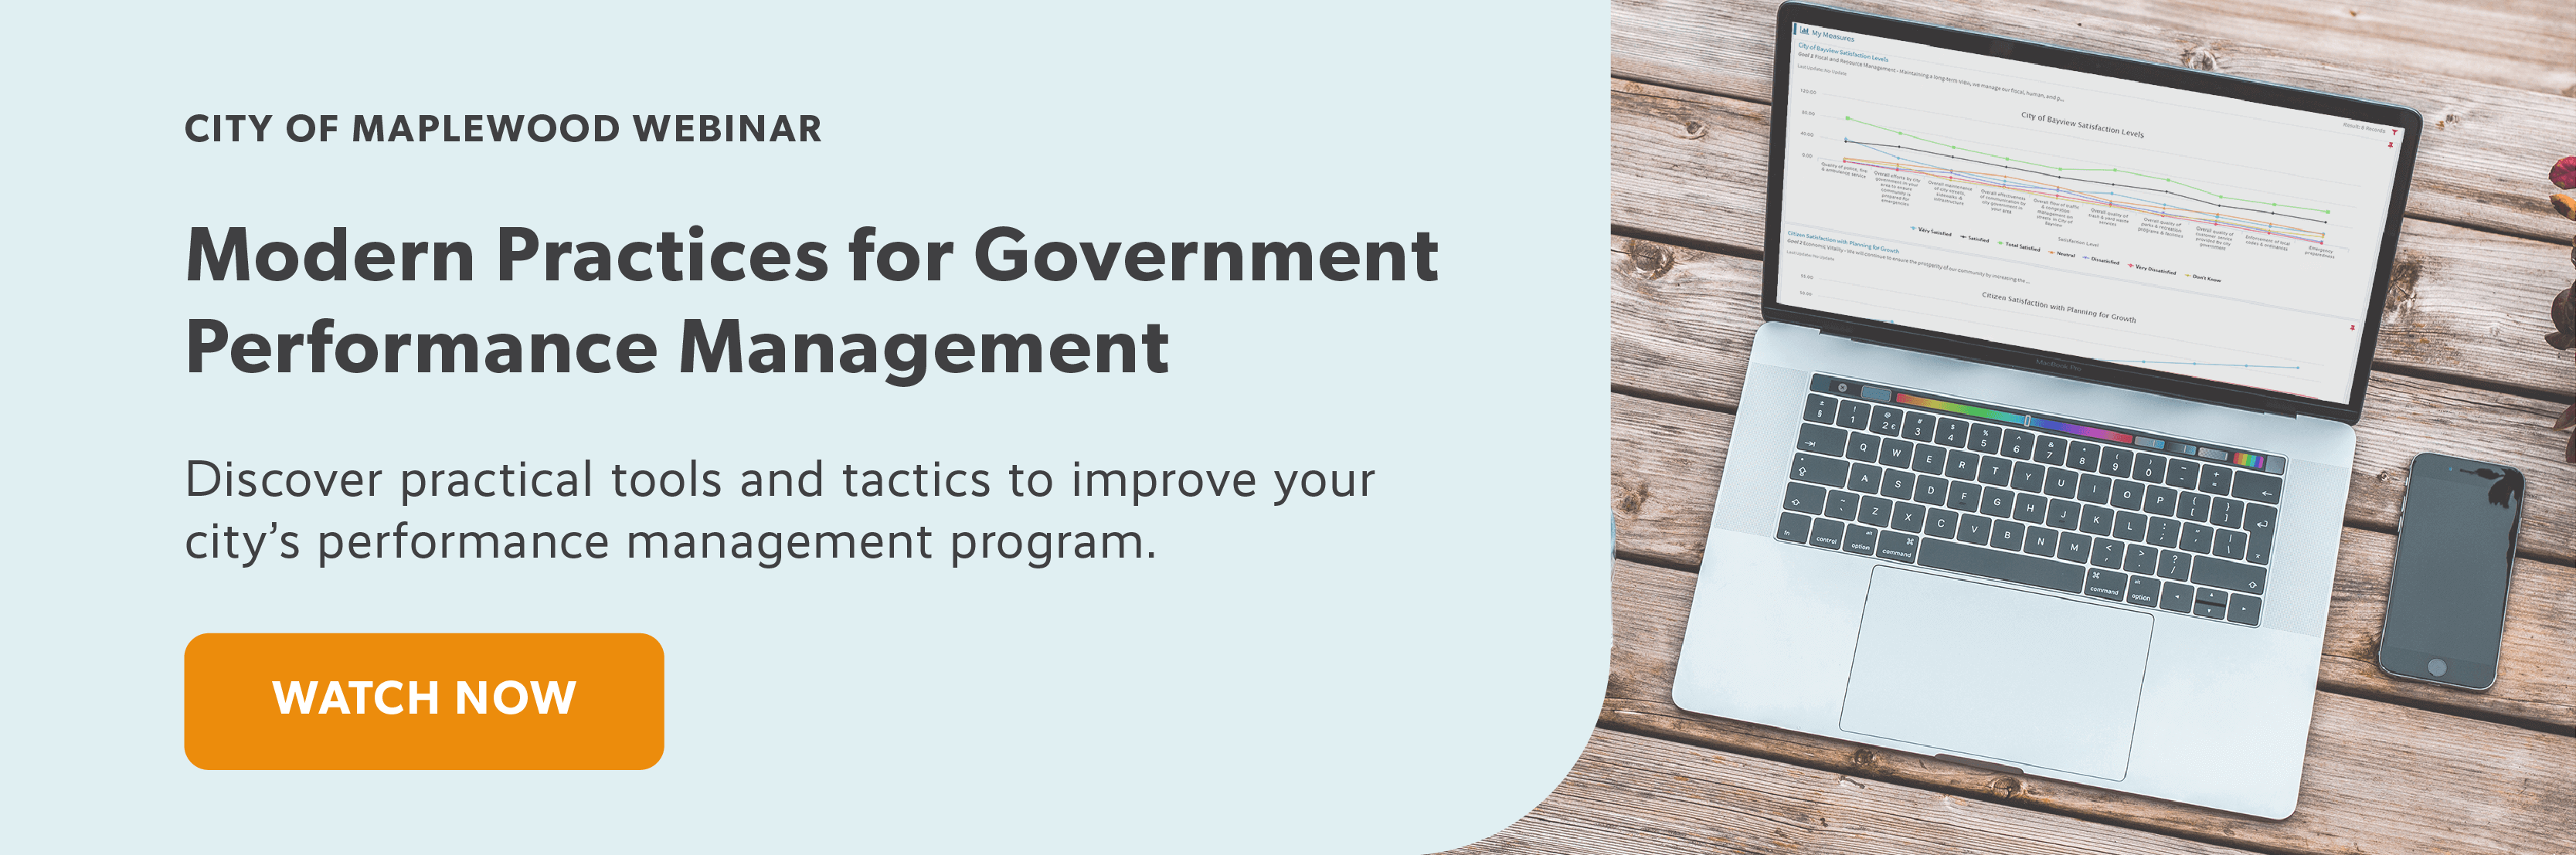 Modern Practices for Government Performance Management